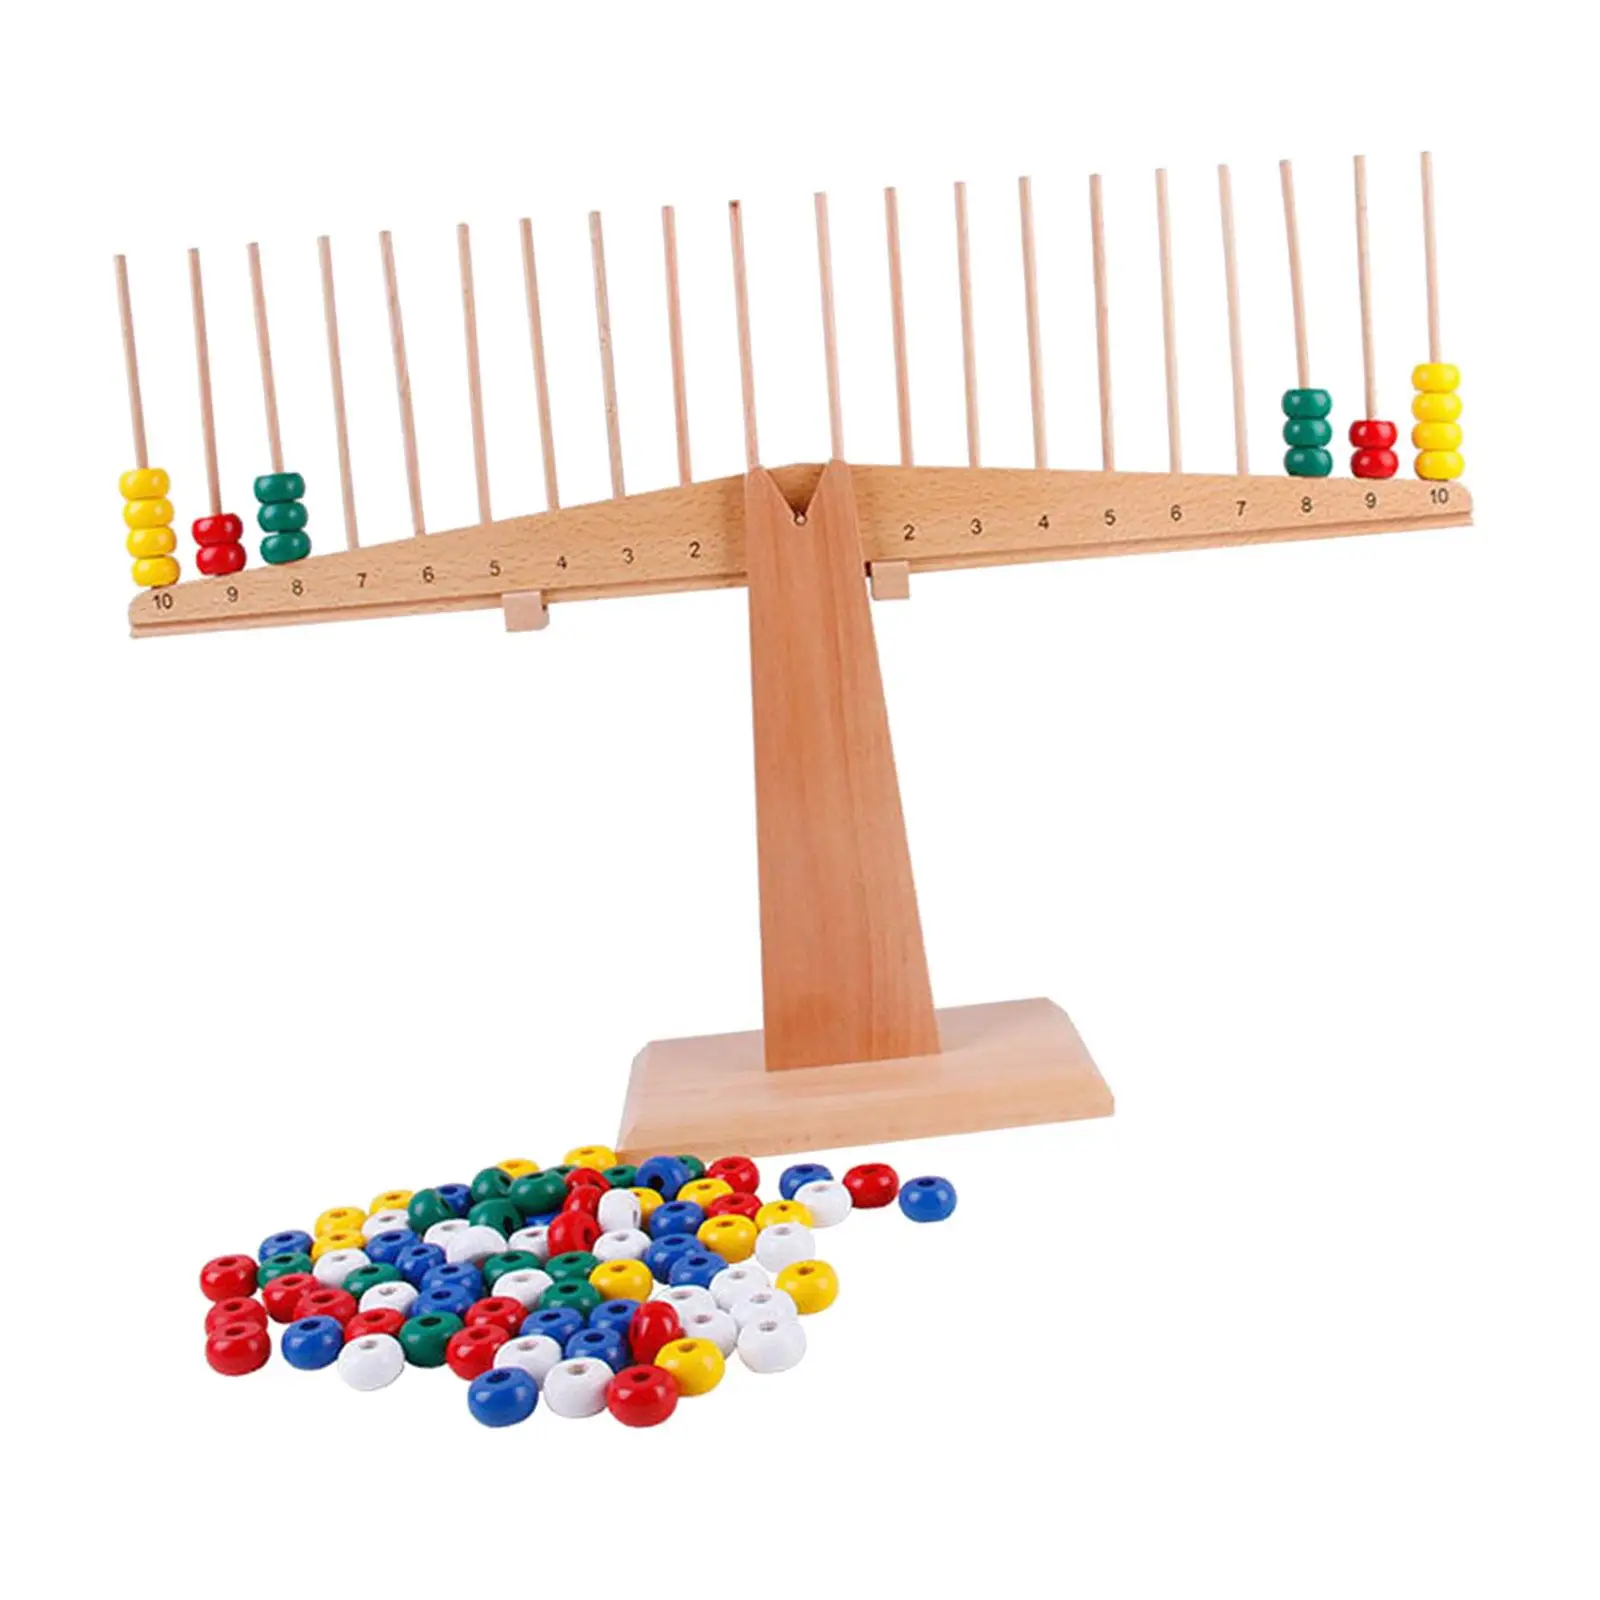 Wooden Balance Counting Toys Develops Motor Skills Fun Interactive Montessori Educational Toy for Boy Girls Party Favors Kids